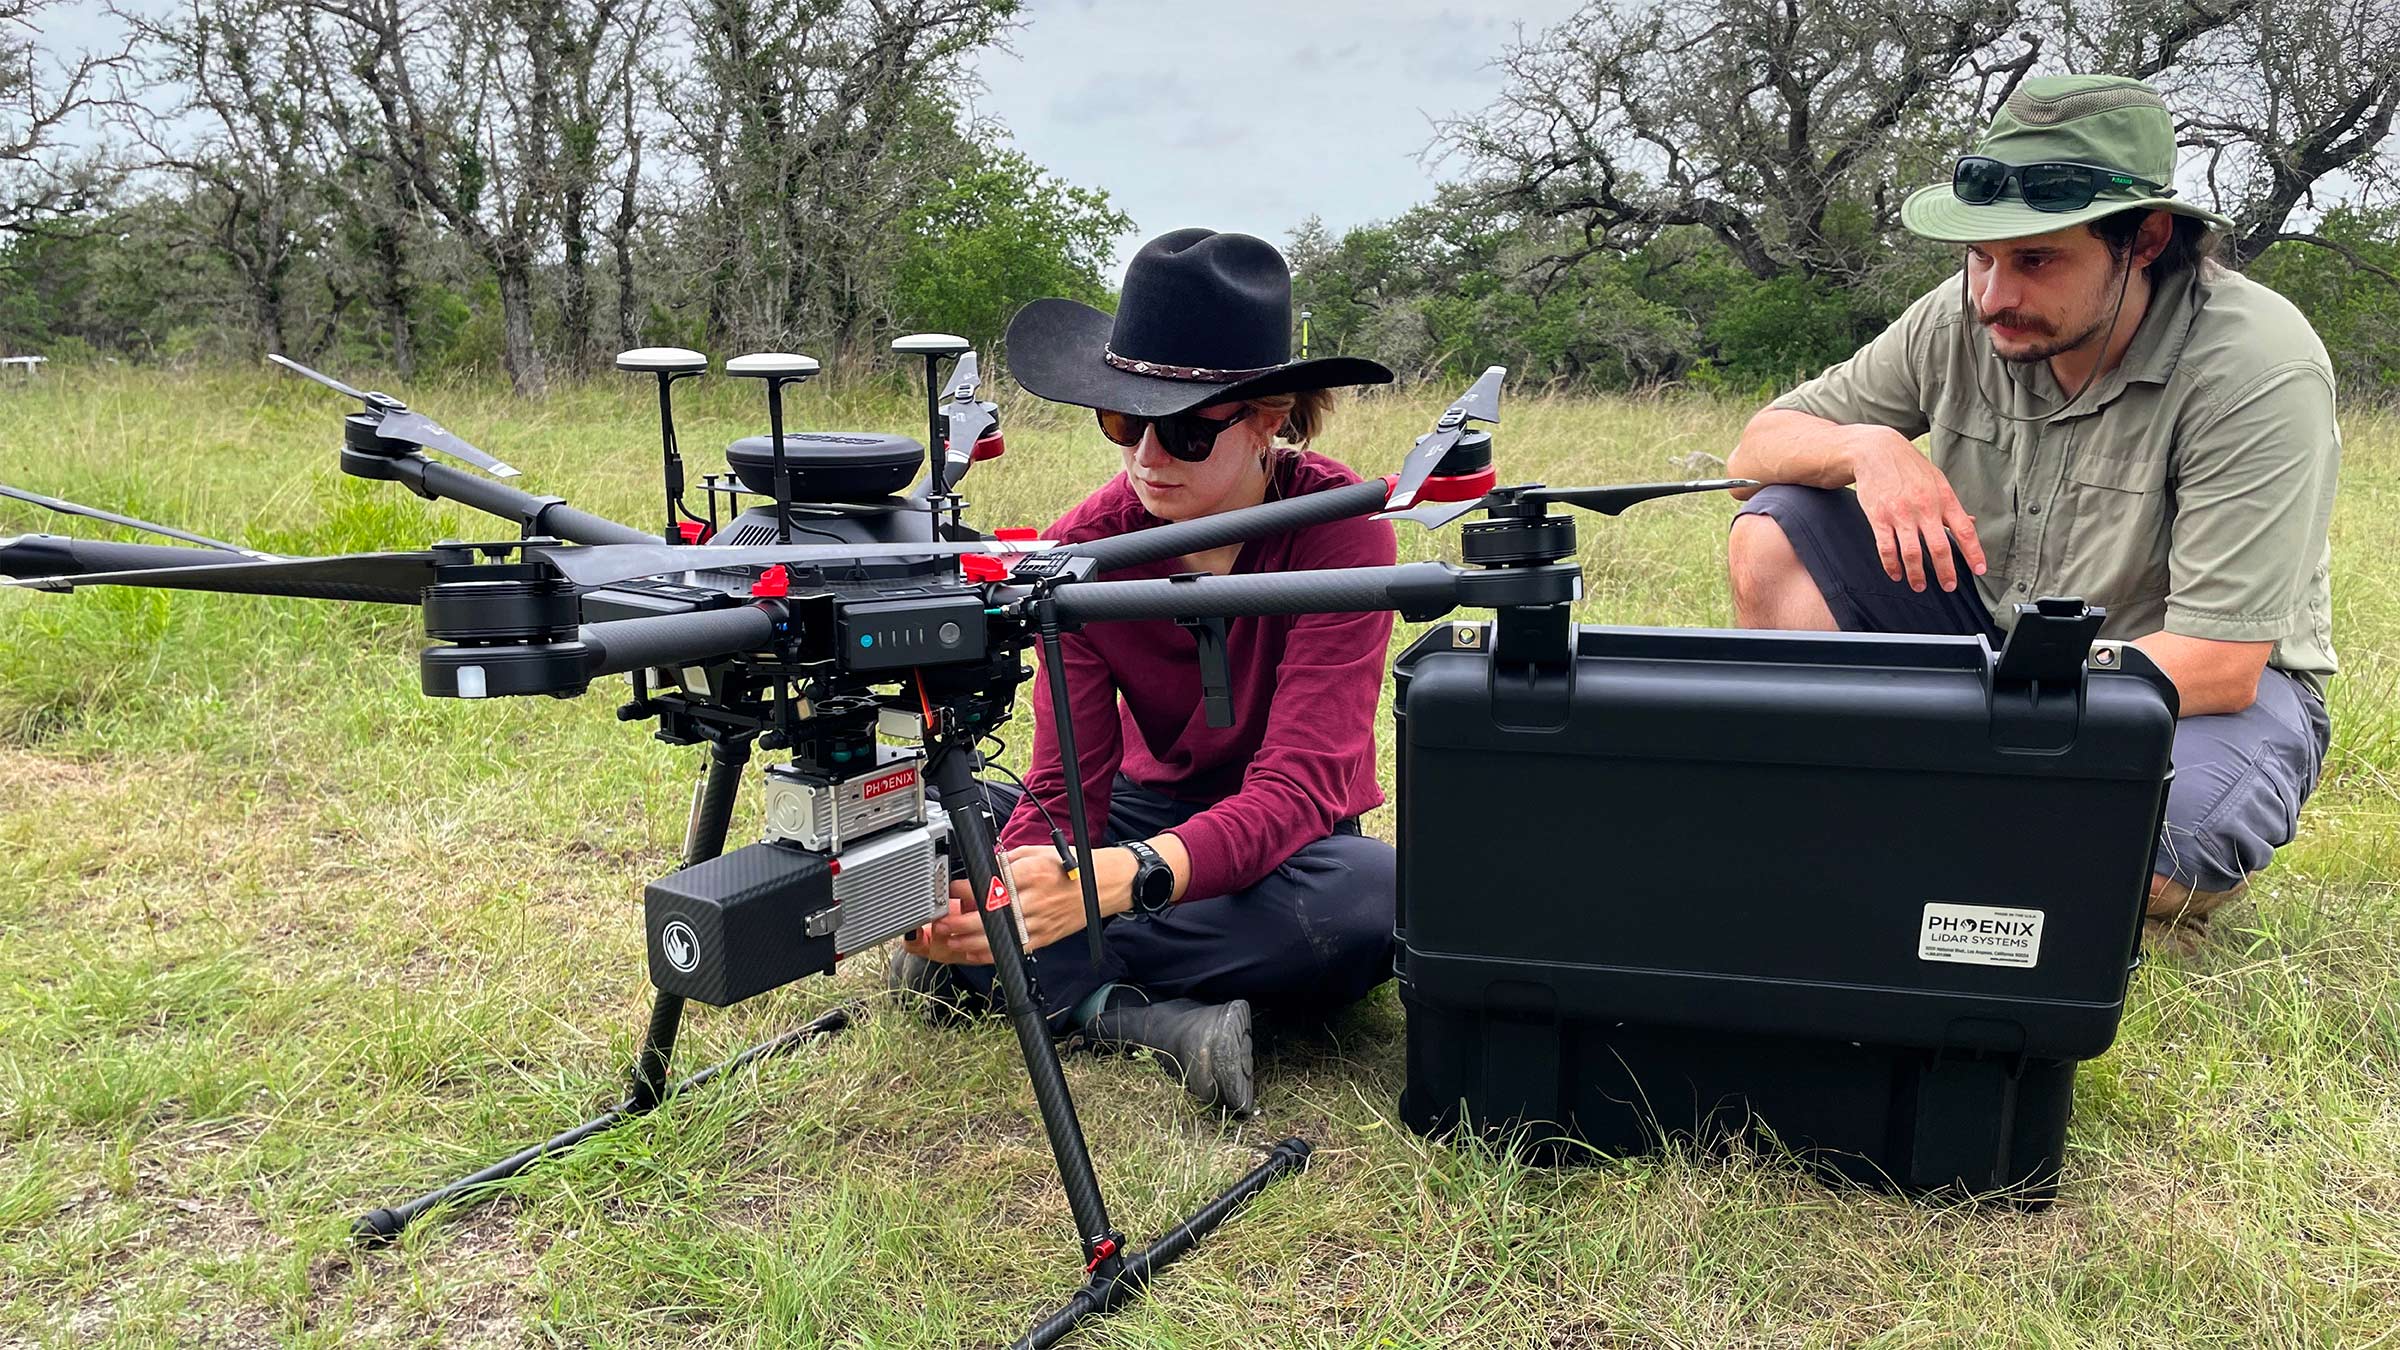 Scientists work with a drone-like machine outside while squatting next to equipment outdoors in the Texas Hill Country